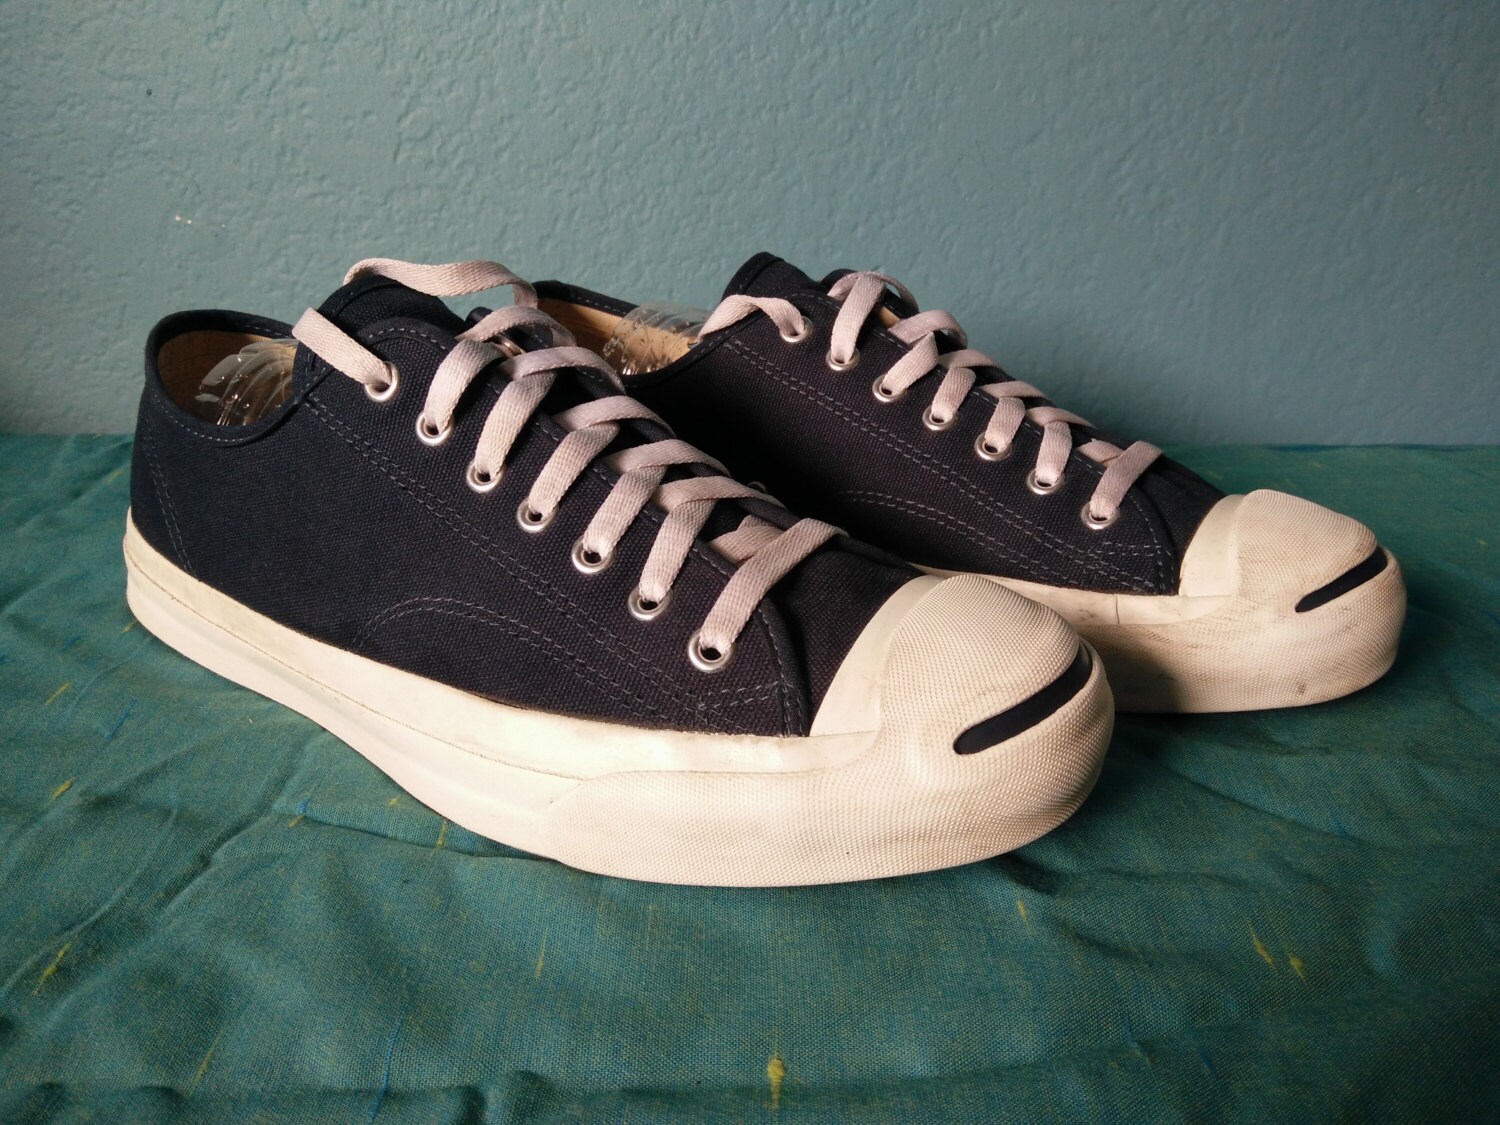 Converse Jack Purcell men's sneakers shoes navy blue size